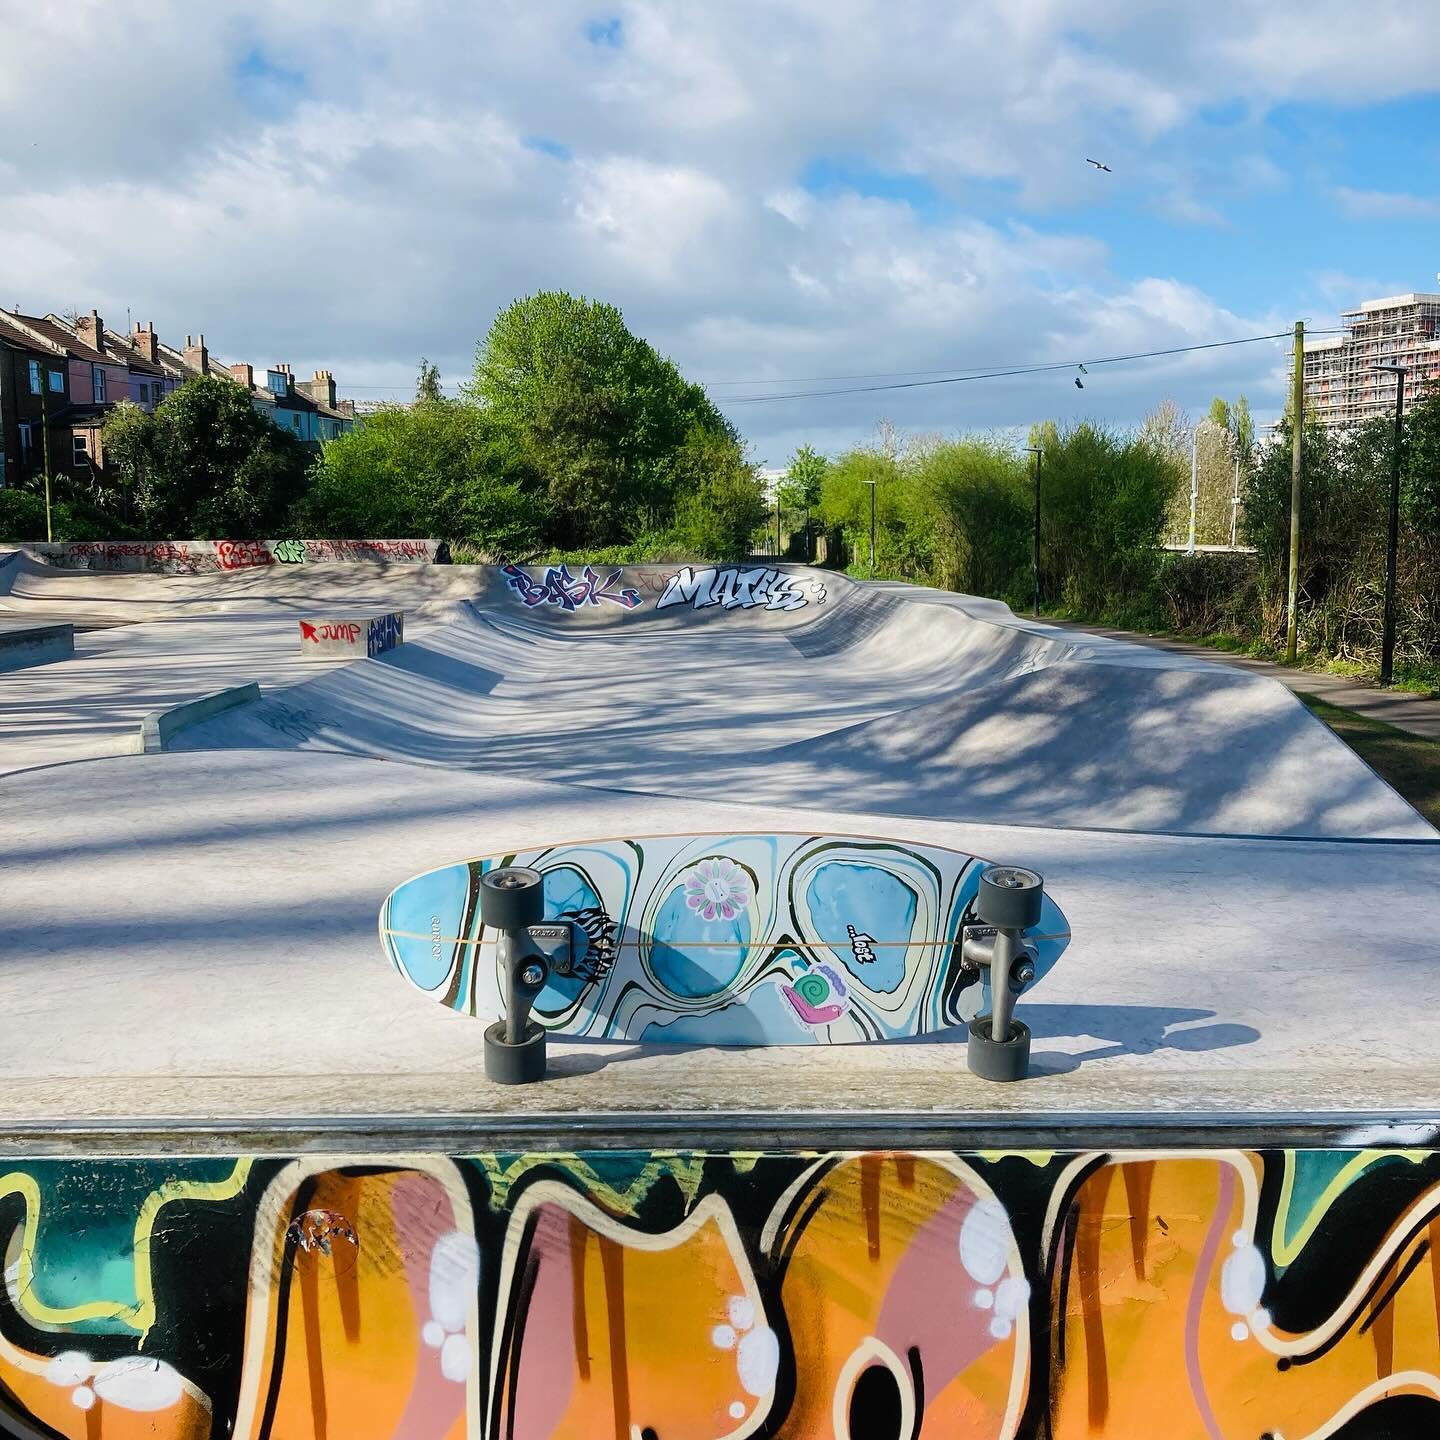 Hello shiny new Bristol skatepark ✨ I love that on the walk to get here you go down Little Paradise. Never a truer word spoken ... 😜 Dappled light, birdsong, trains rattling past, friendly faces, and tentative moves from me after not skating in a pr